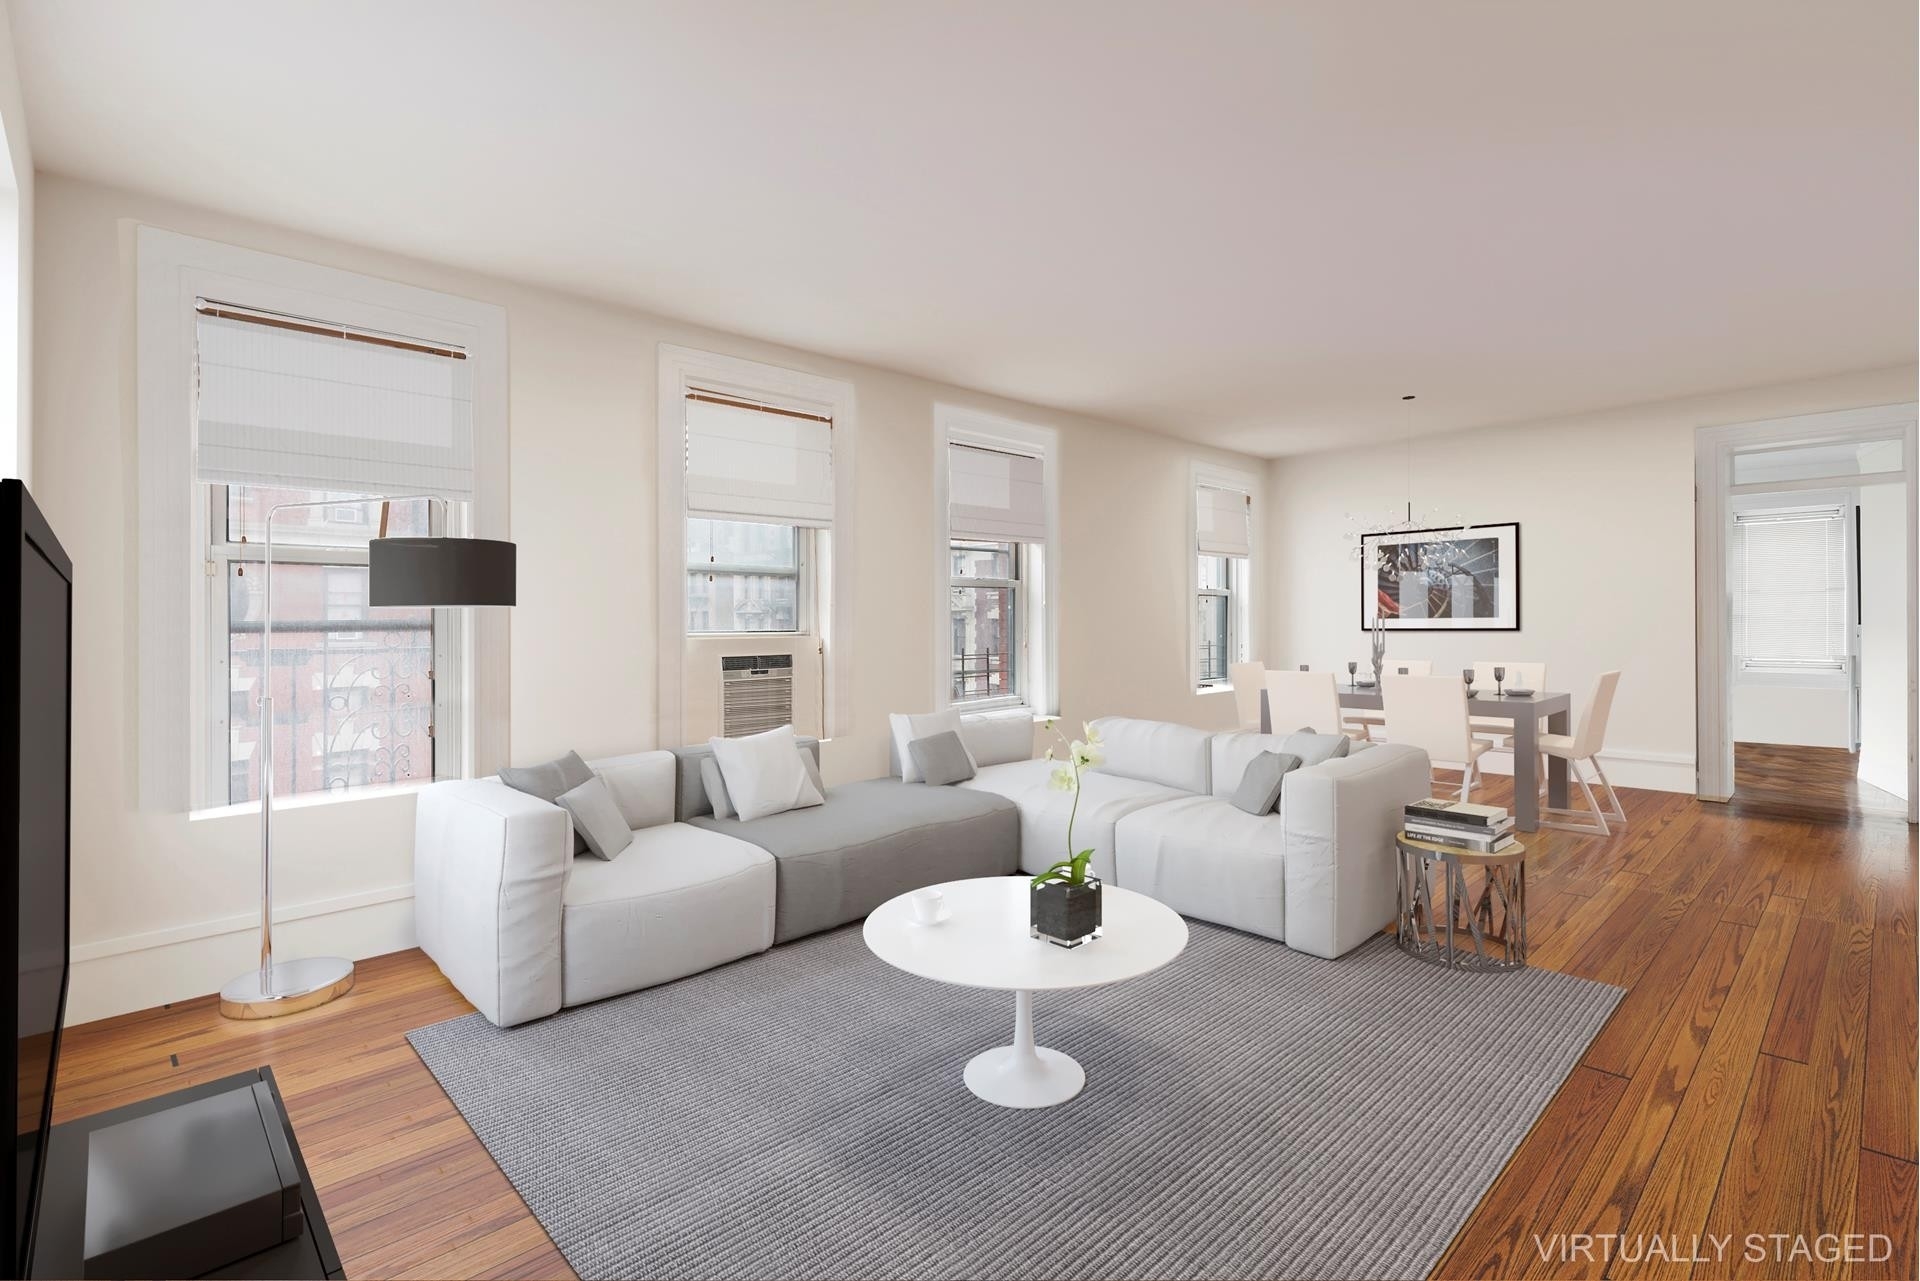 Property at 17 East 97th St, 5B New York